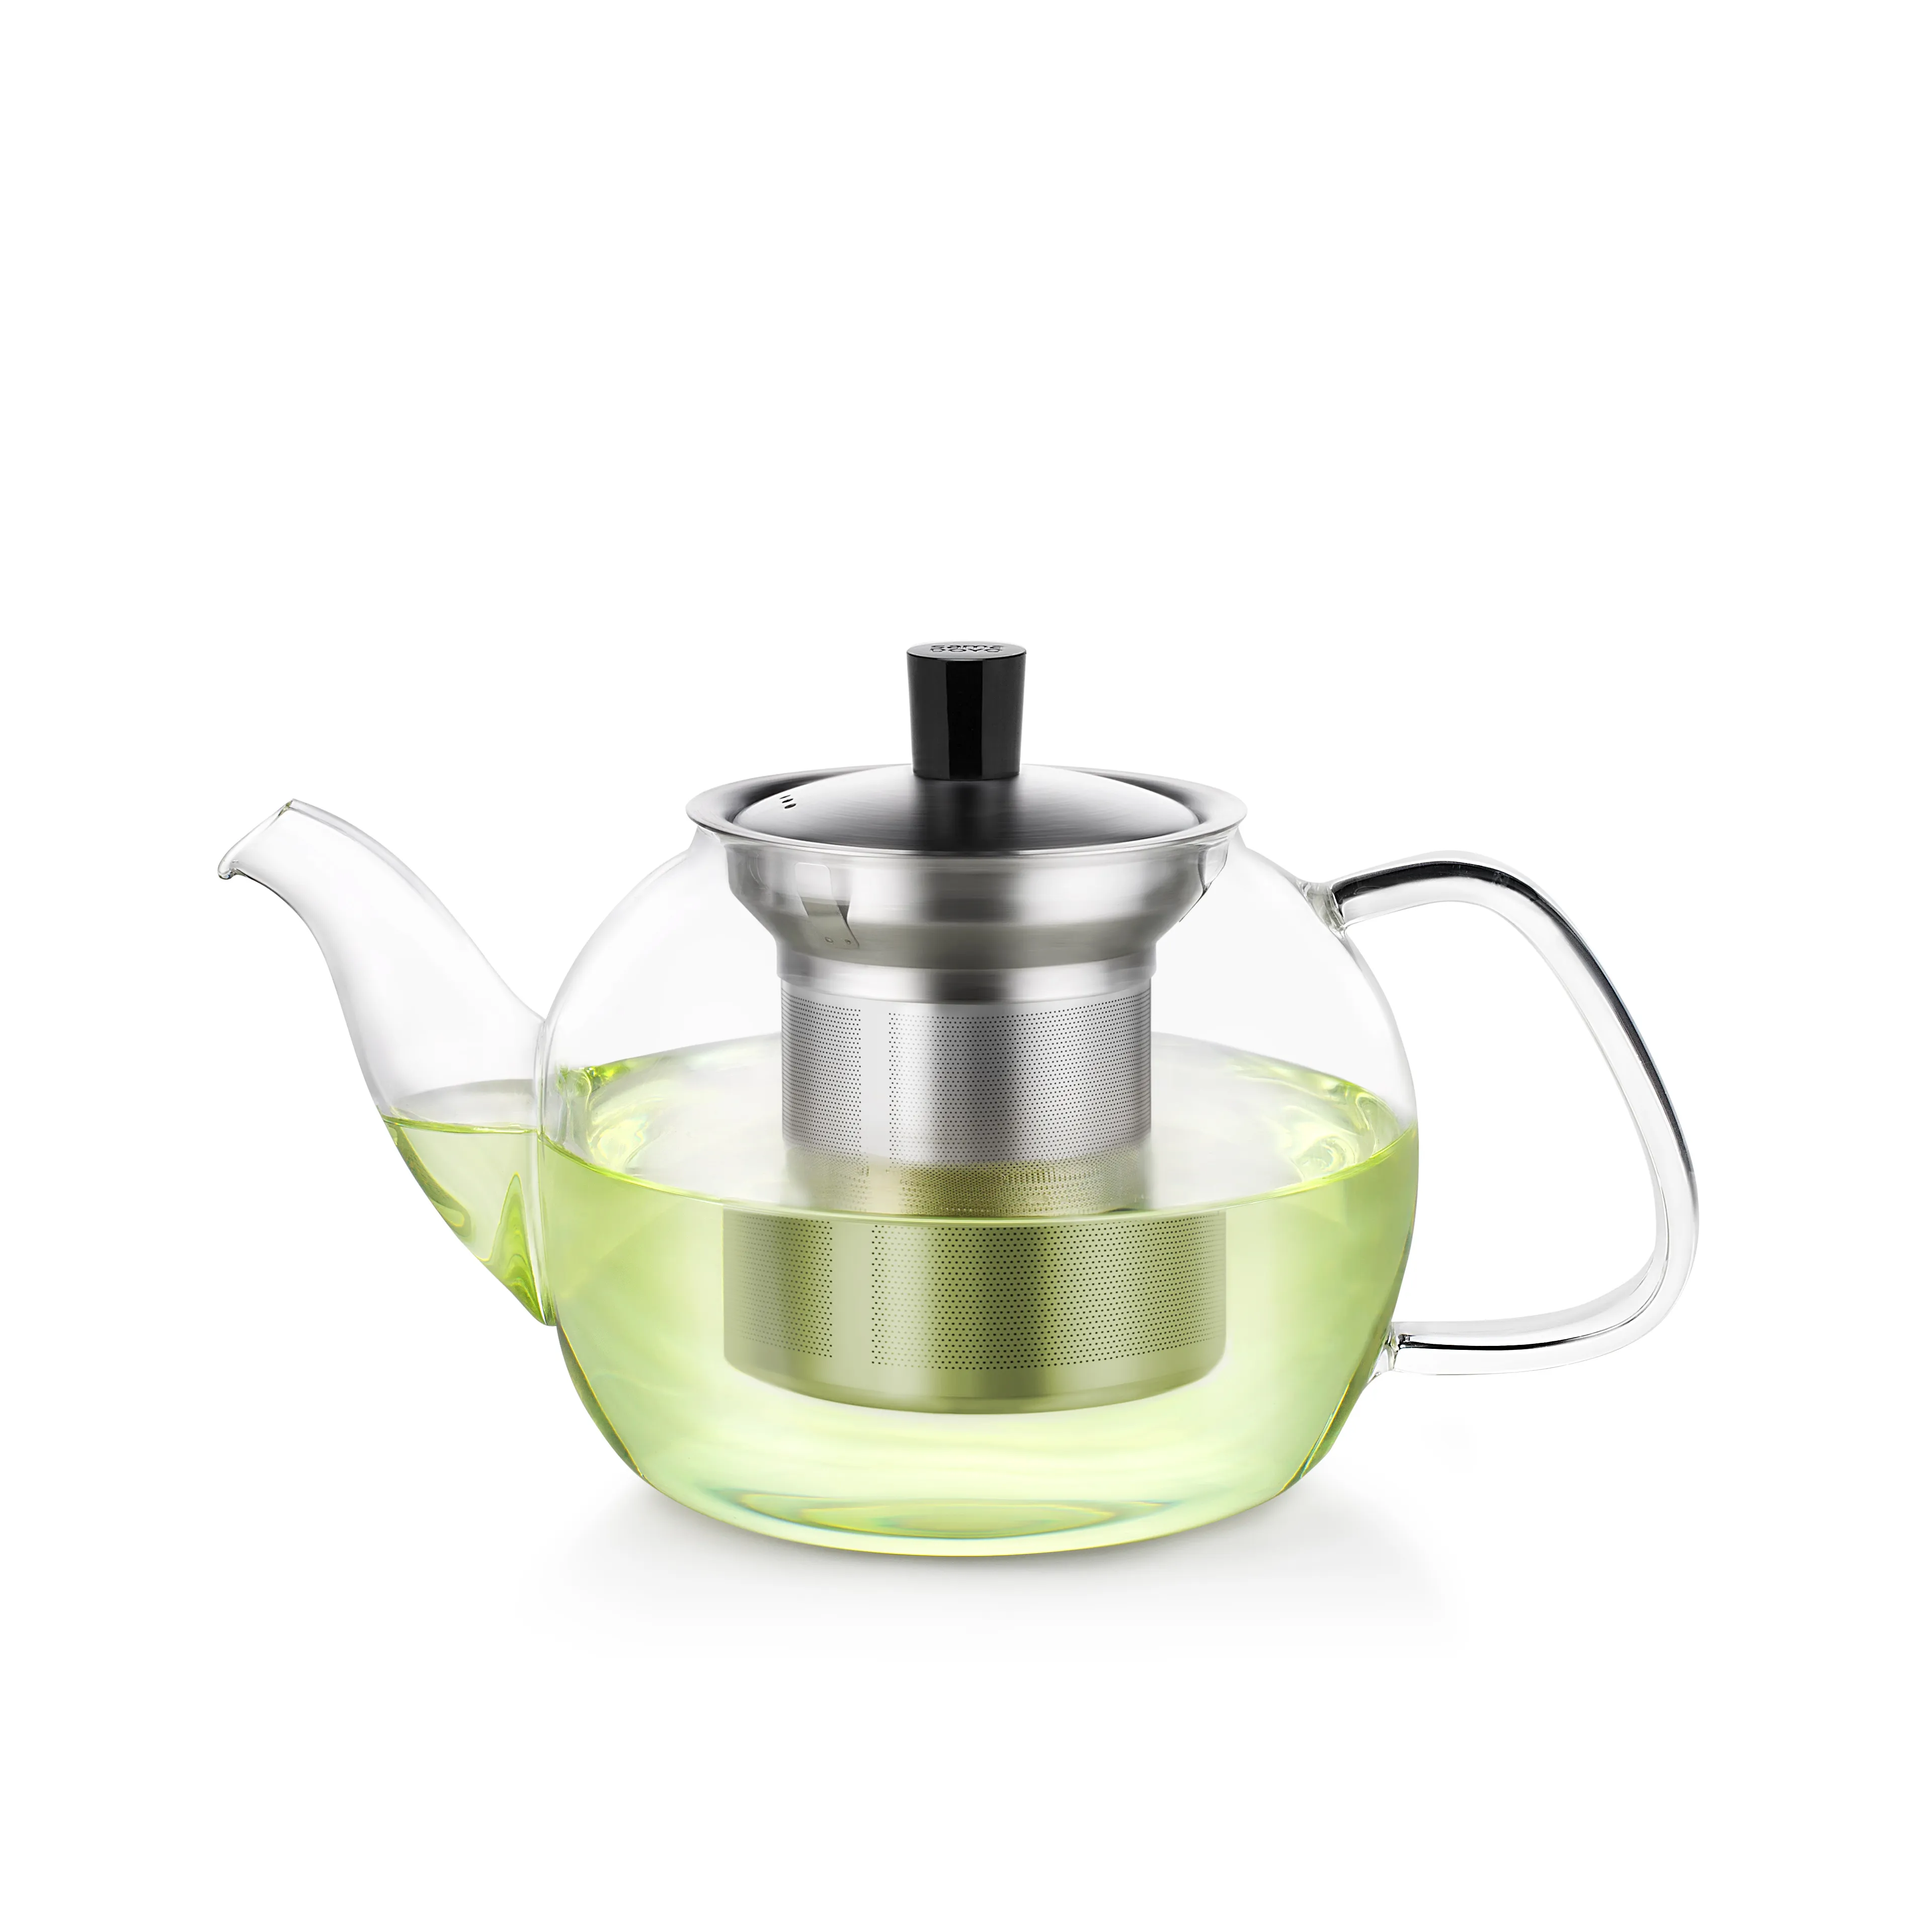 30oz/900ml Drinkware Classic Kettle Boil Blooming Tea Pot Sets Maker Clear Glass Teapot With Stainless Steel Lid And Infuser